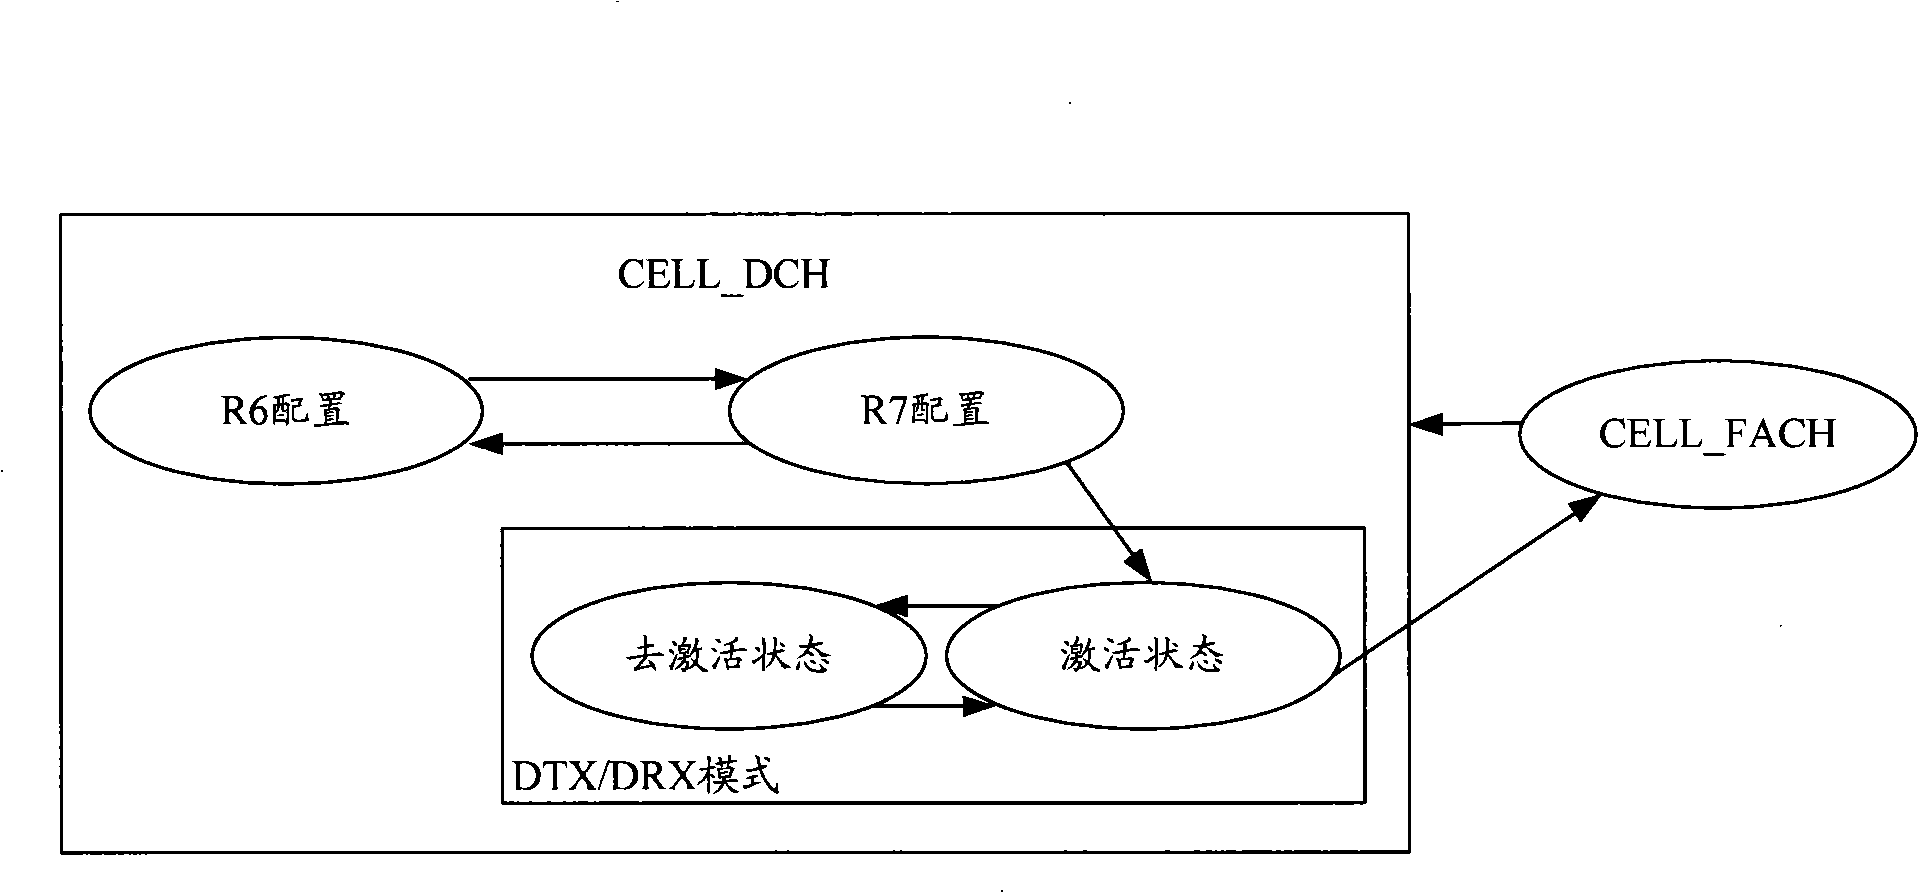 Service configuring method and apparatus